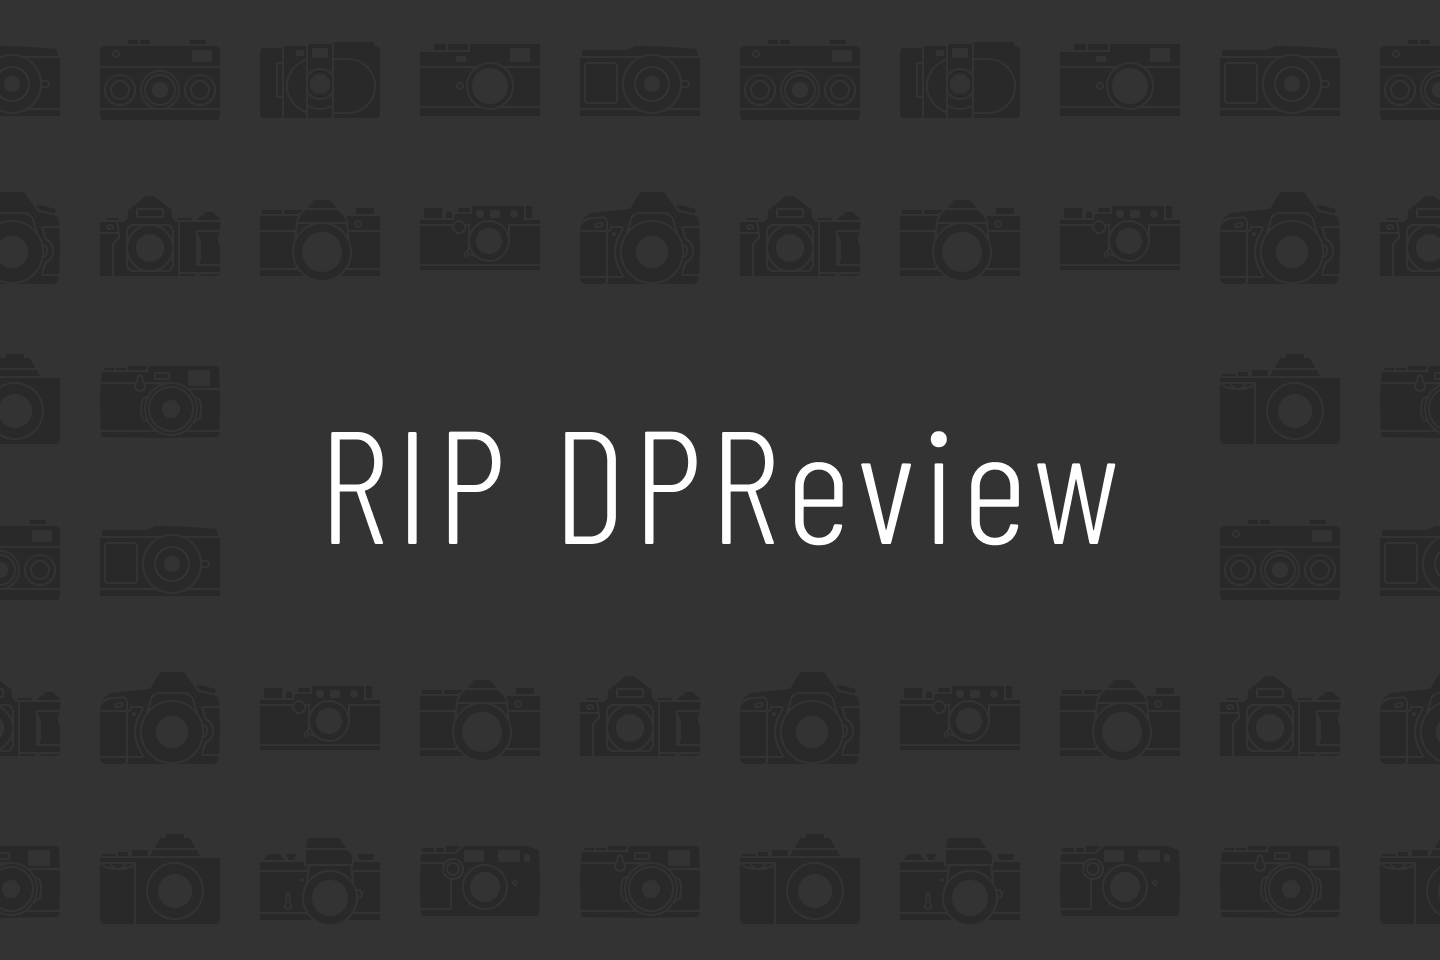 RIP DPReview